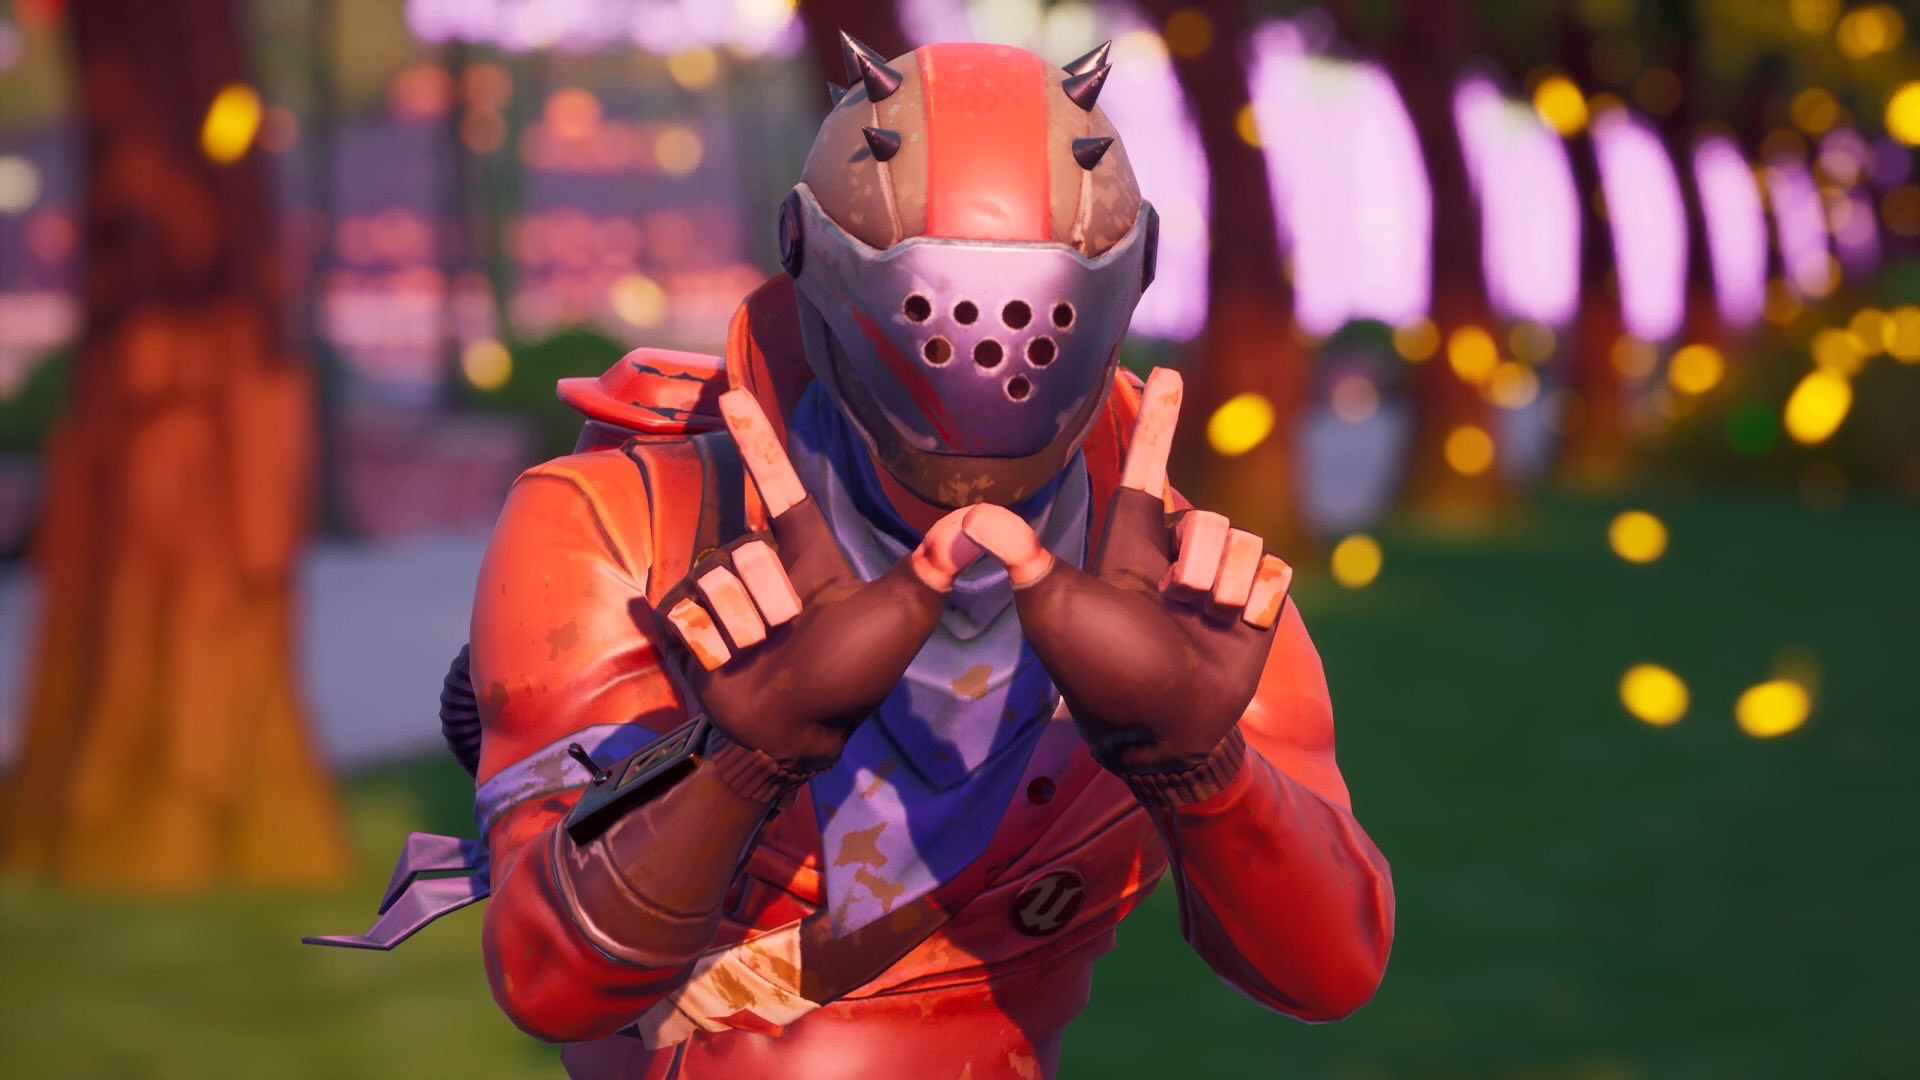 Rust Lord Fortnite Wallpapers